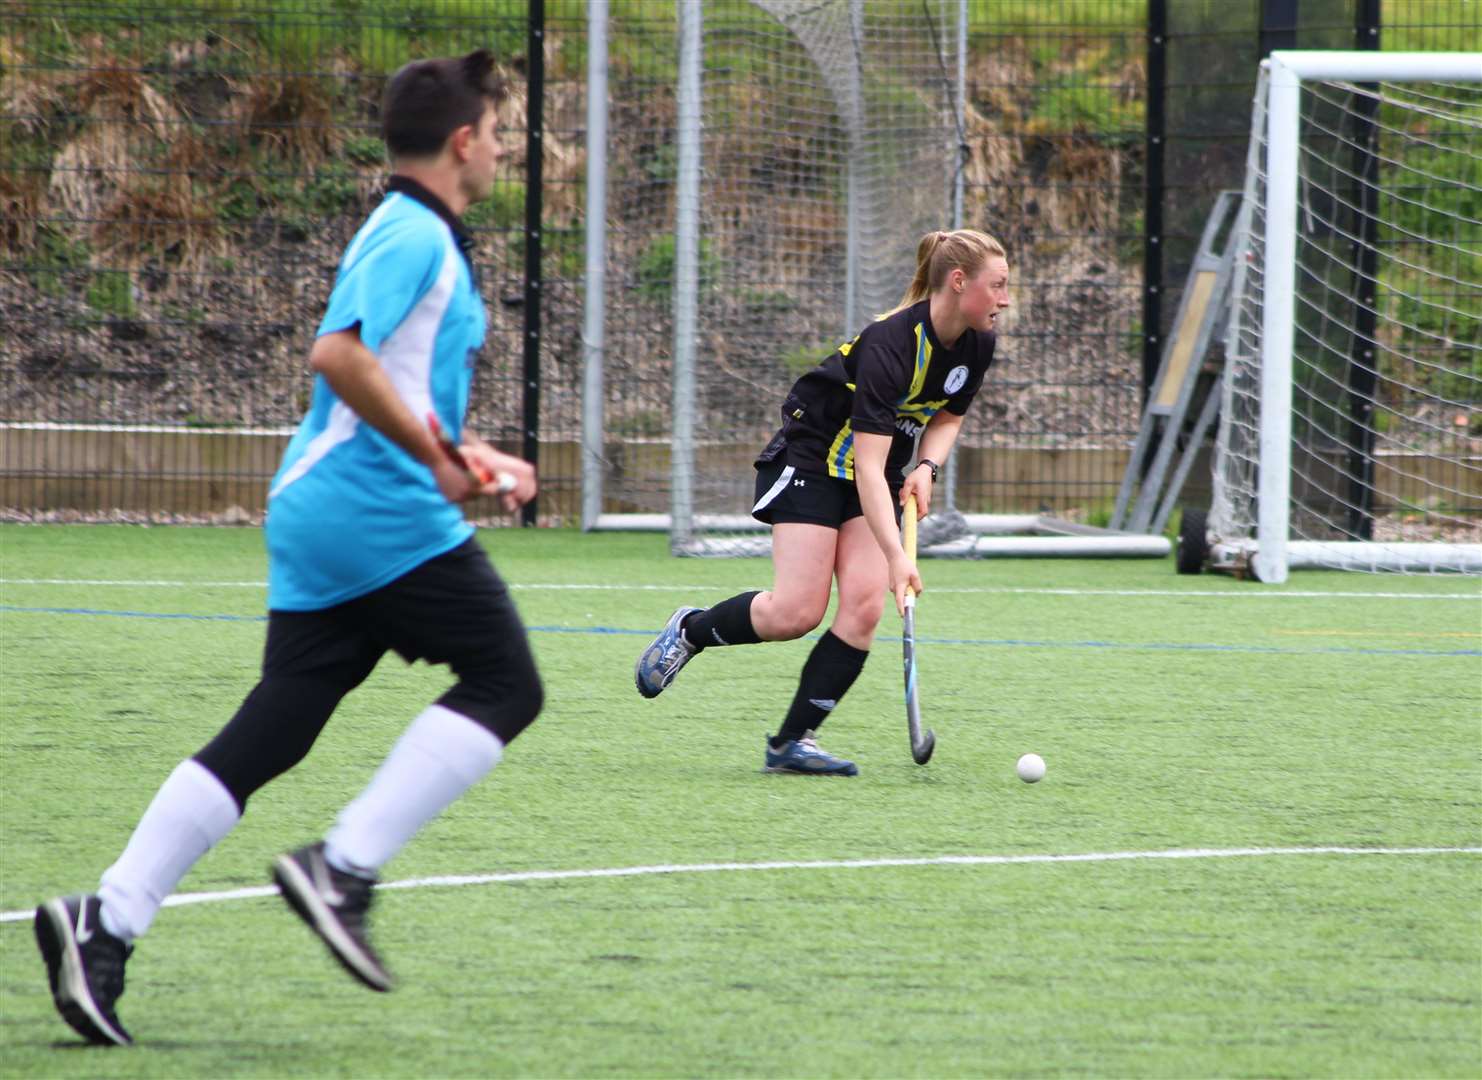 Thurso's Phoebe Strachan on the run in the match at Oban.